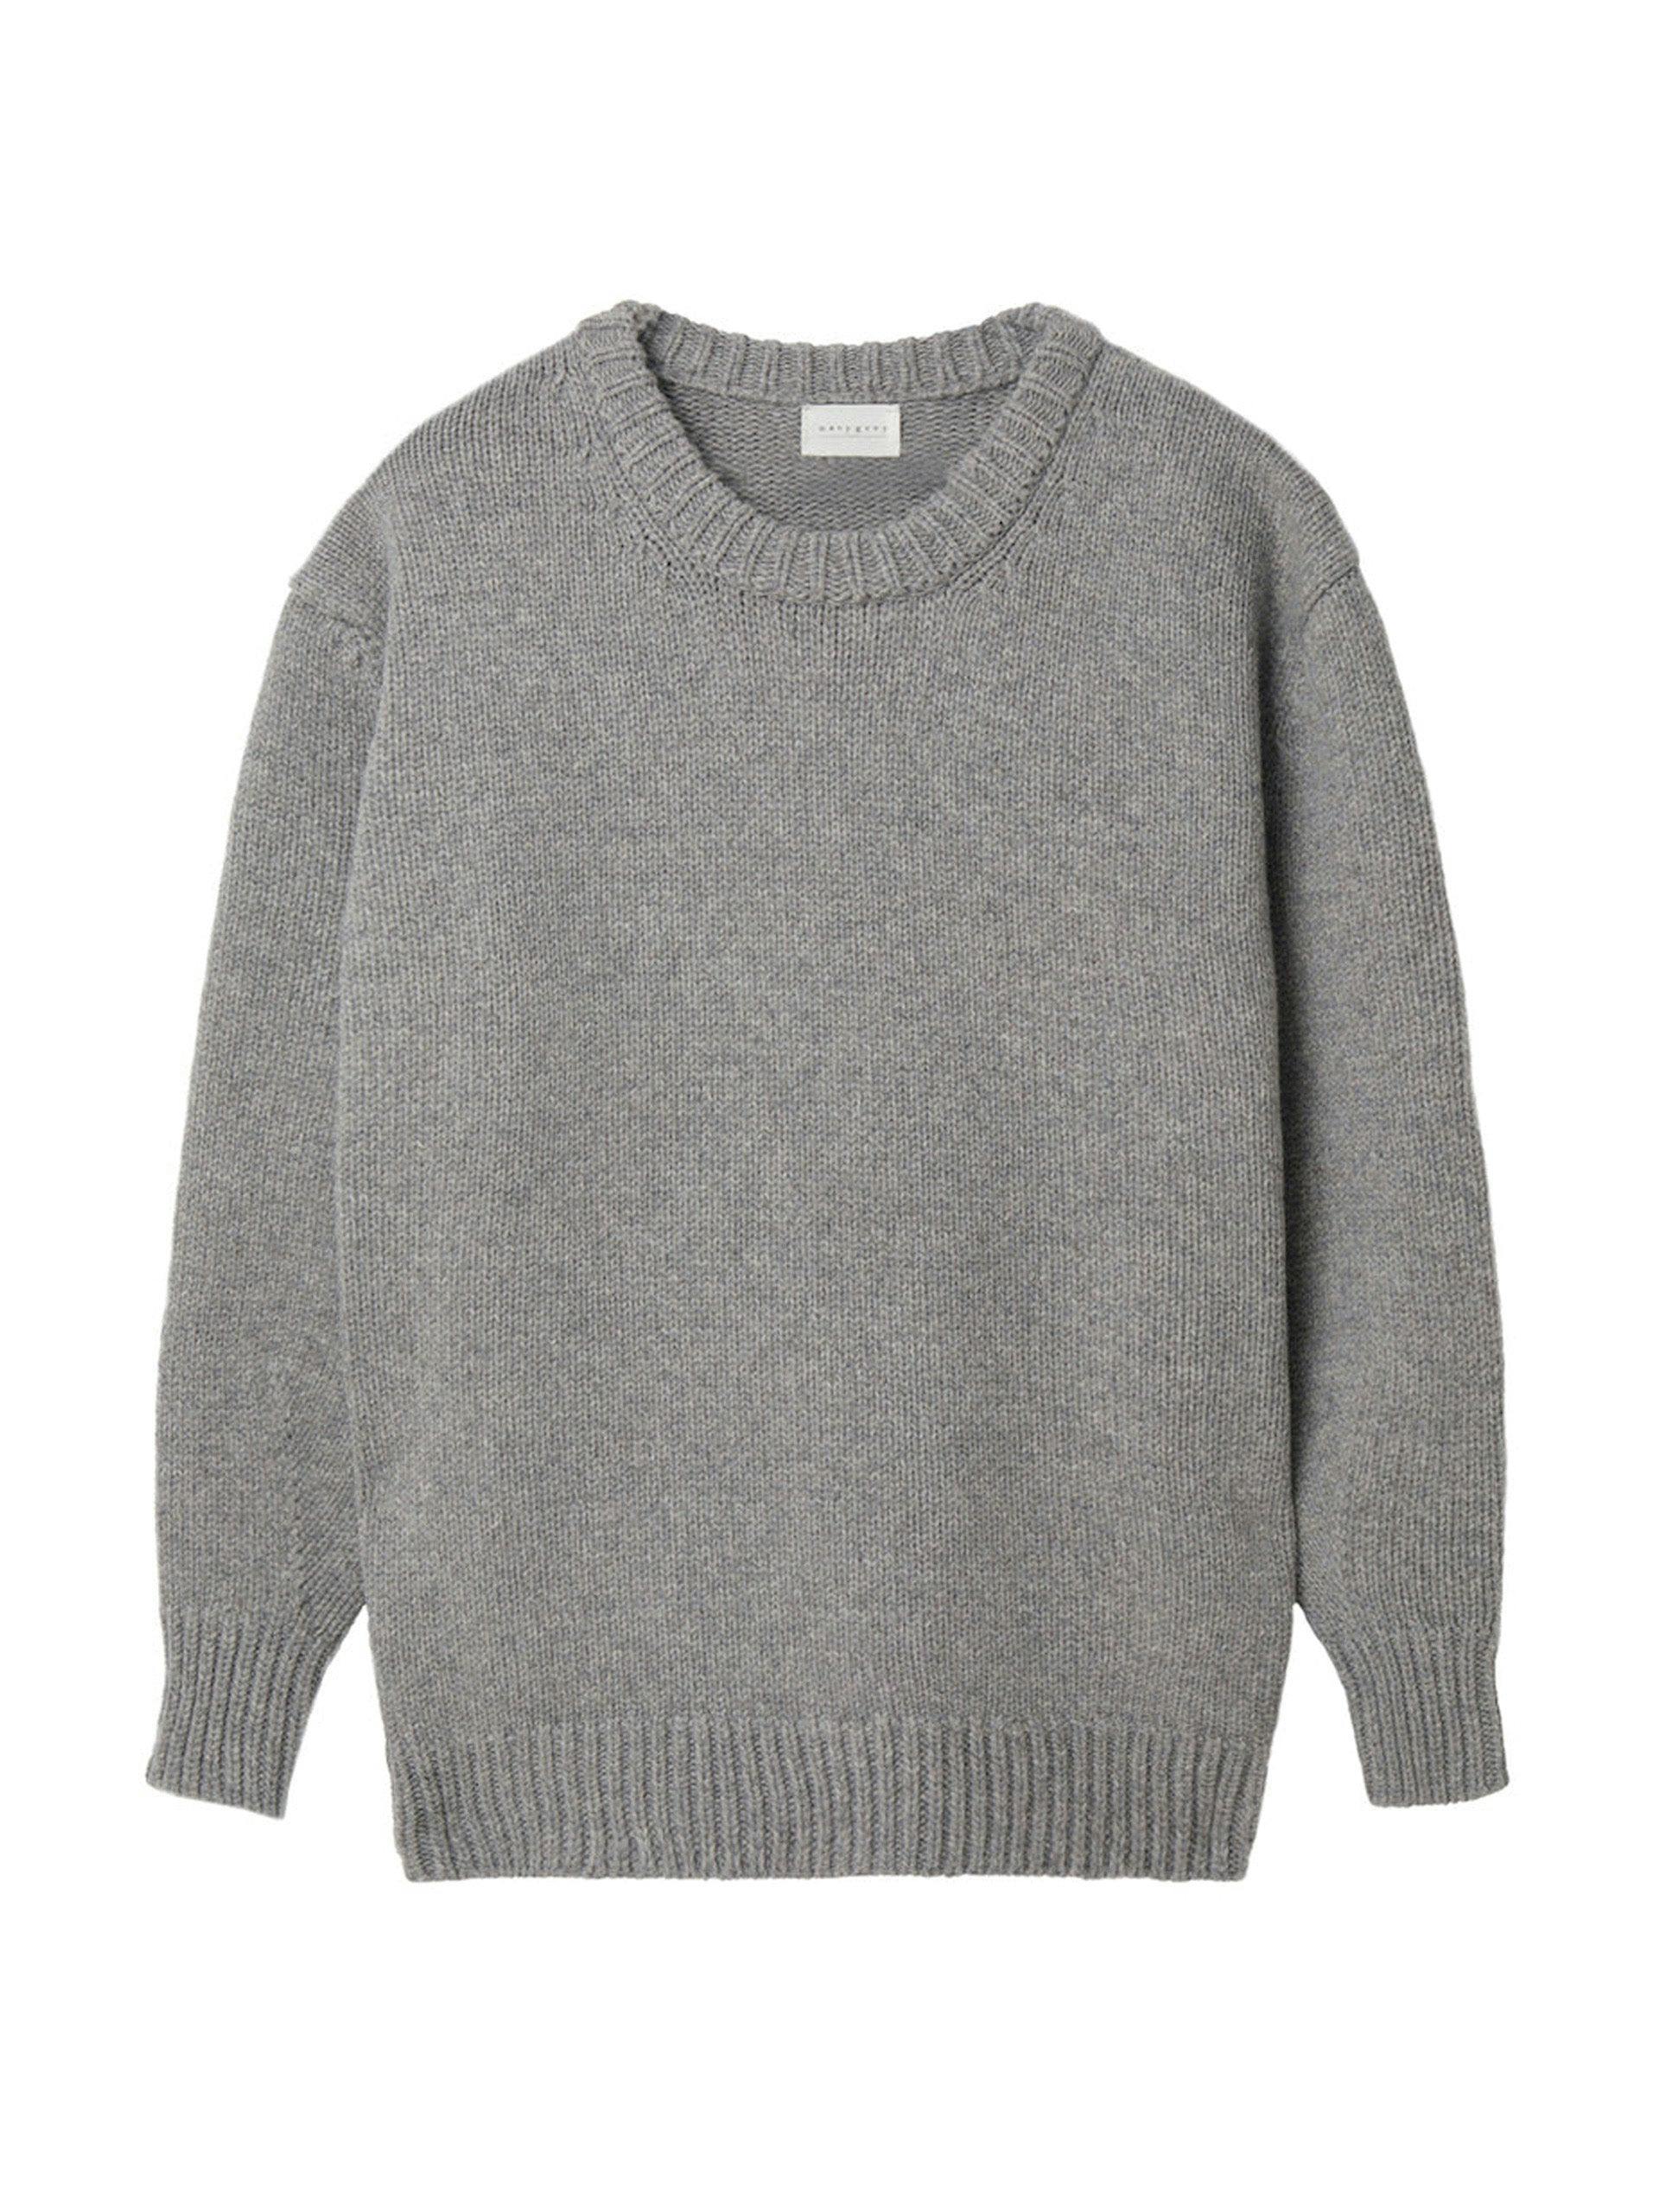 The Oversize knit in storm grey